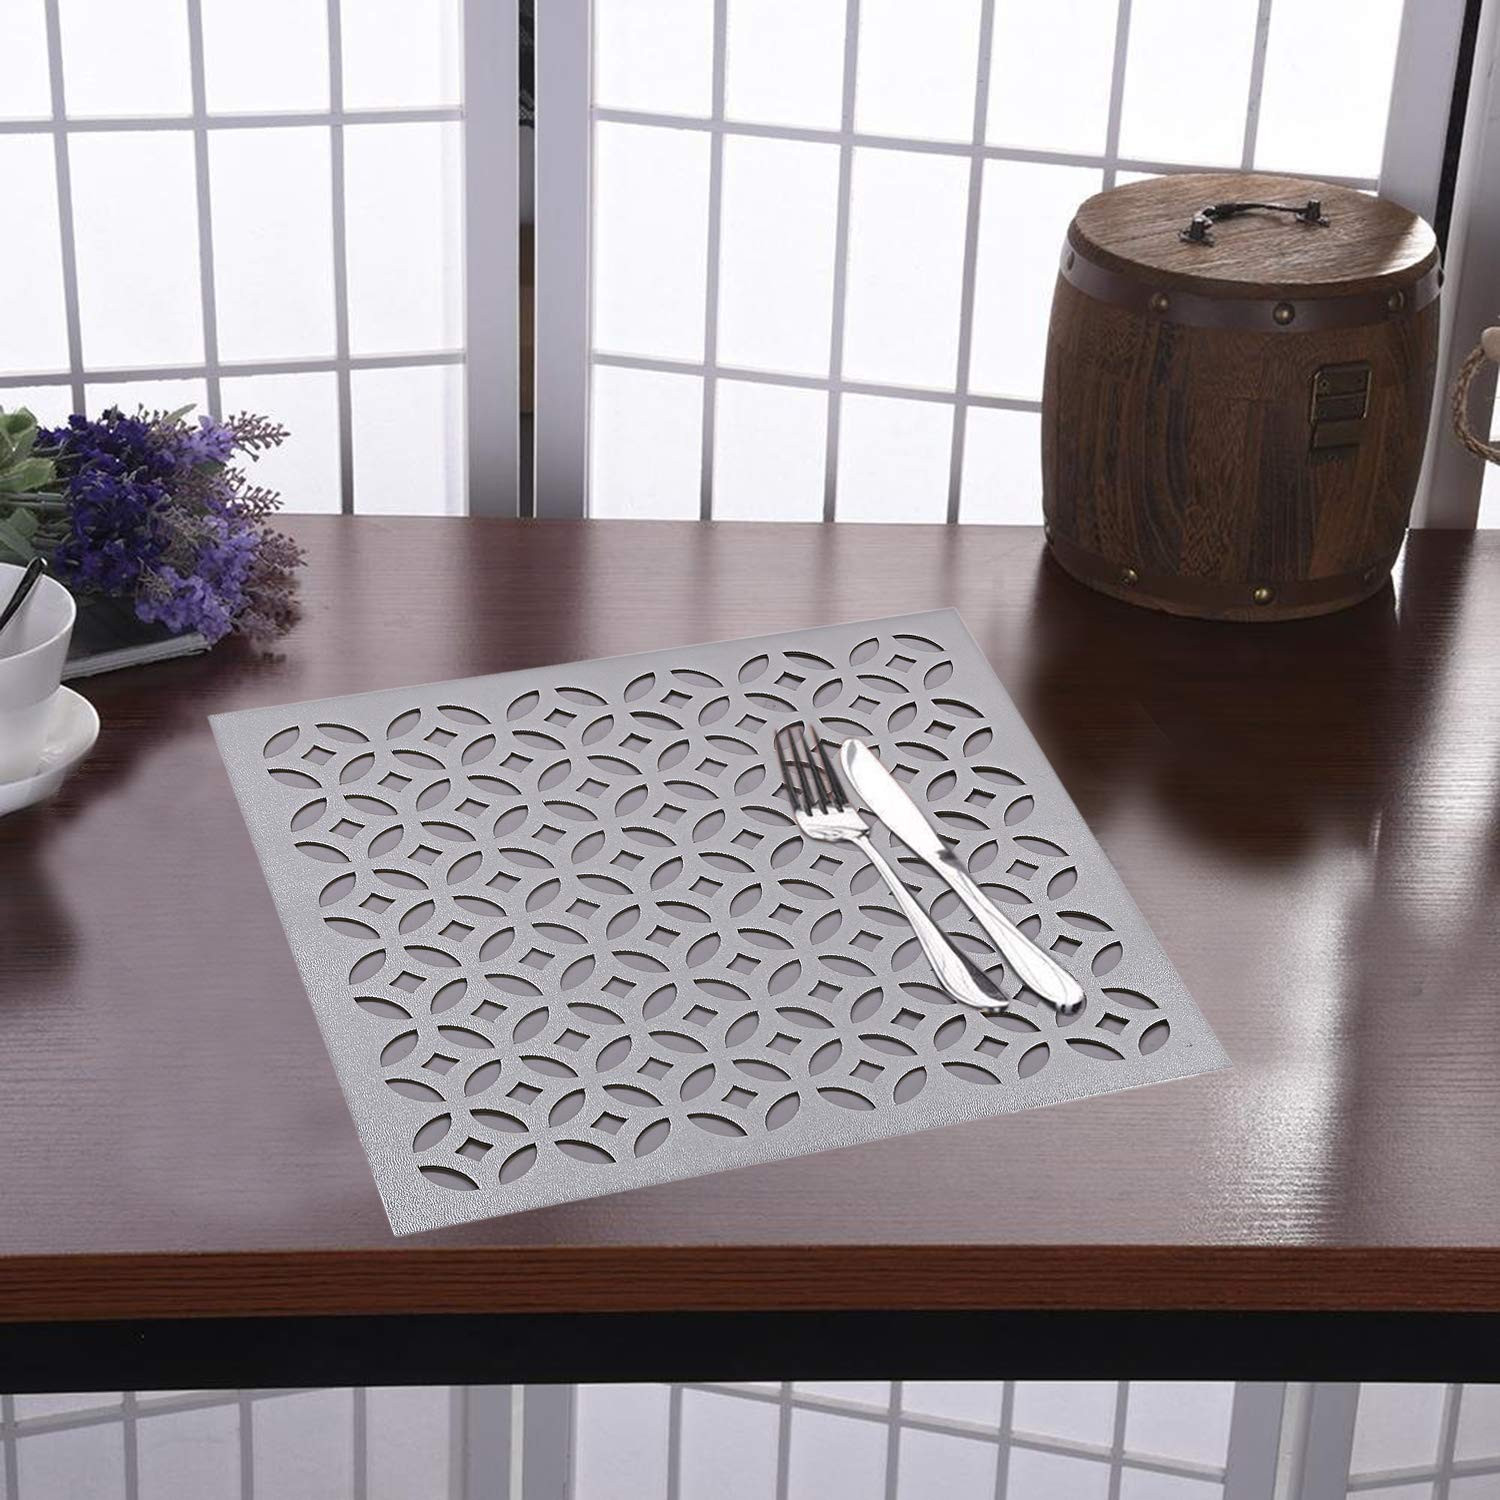 Kuber Industries Square Soft Leather Table Placemats, Set of 4 (Silver)